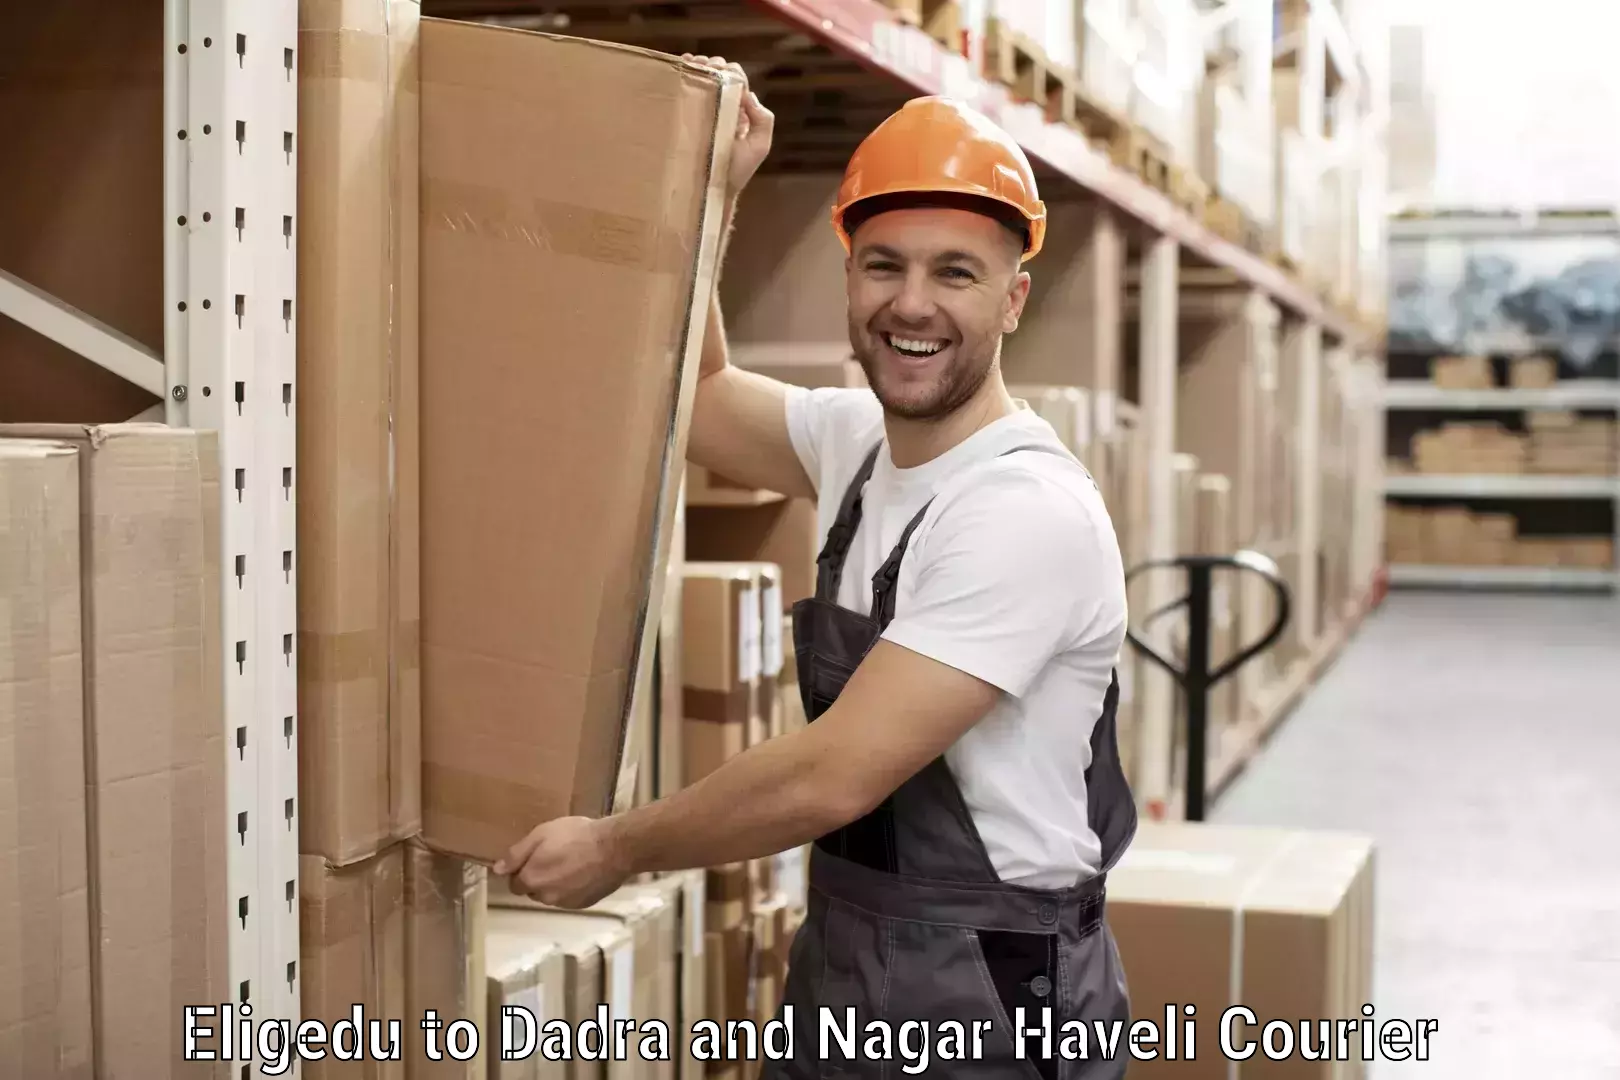 Reliable package handling Eligedu to Dadra and Nagar Haveli